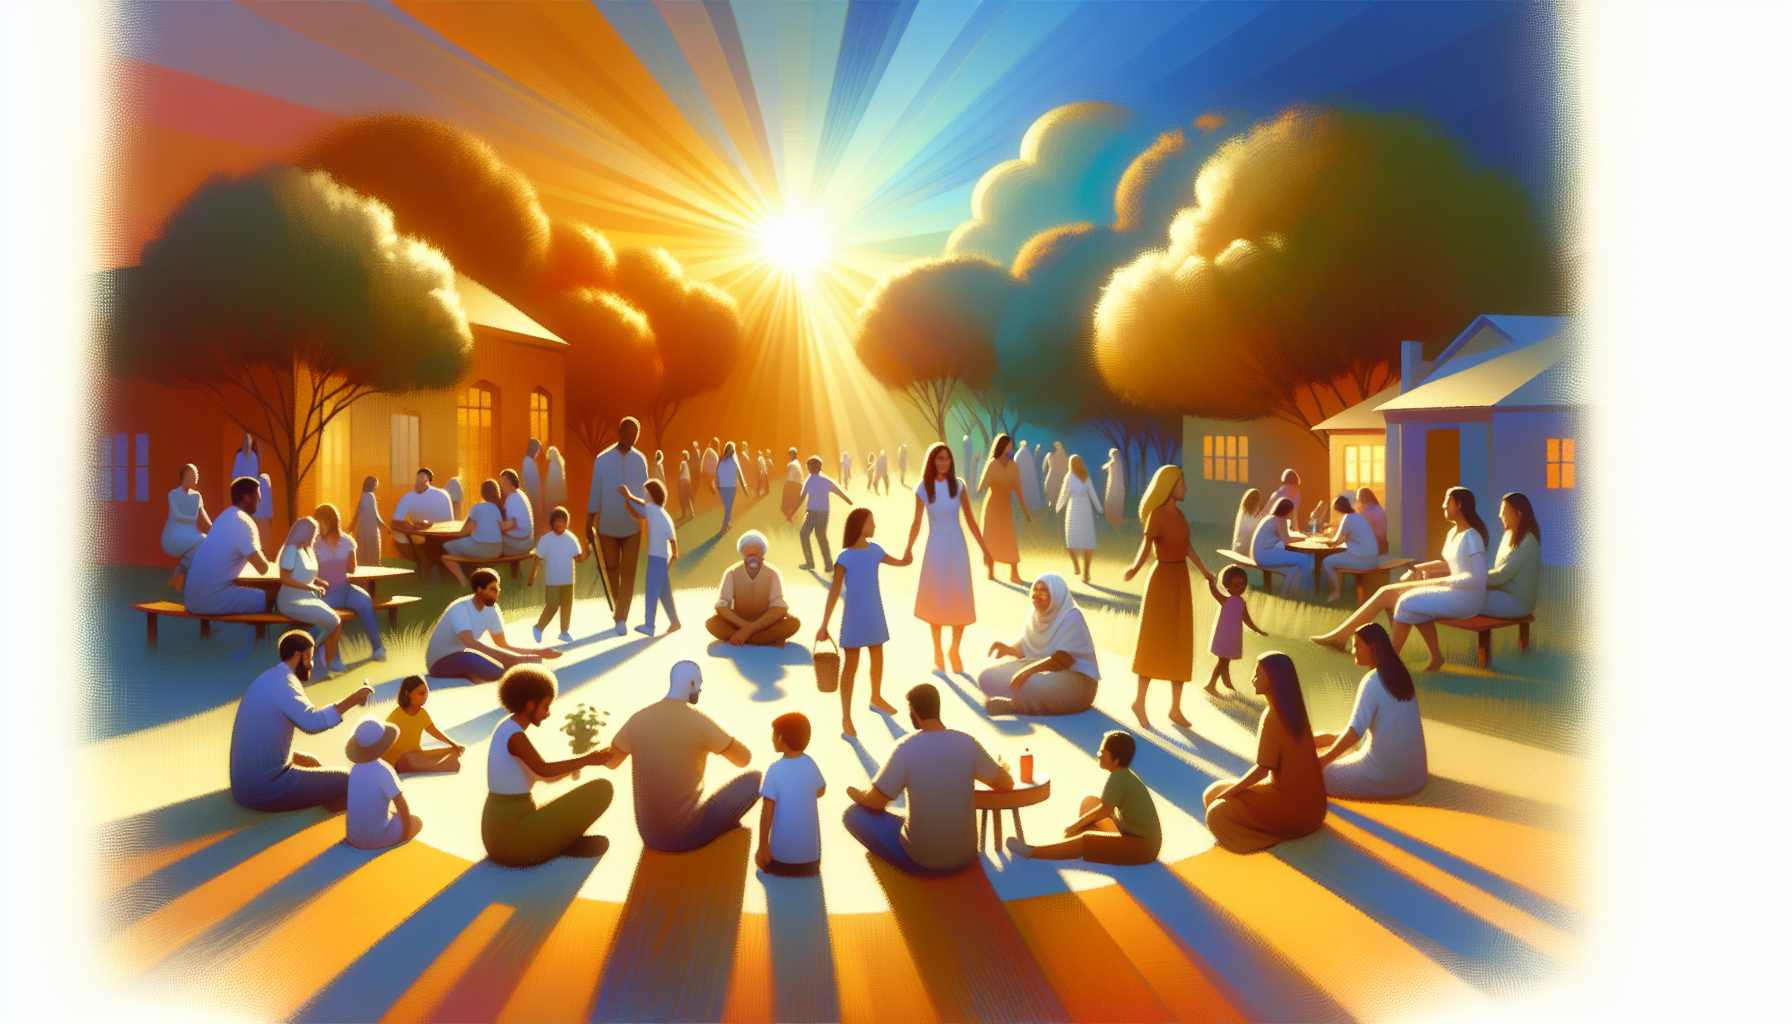 Visual depiction of a serene and harmonious community setting, illustrating the concepts of unity and light from Philippians 2:14-16. The composition features diverse people of different ages and ethn